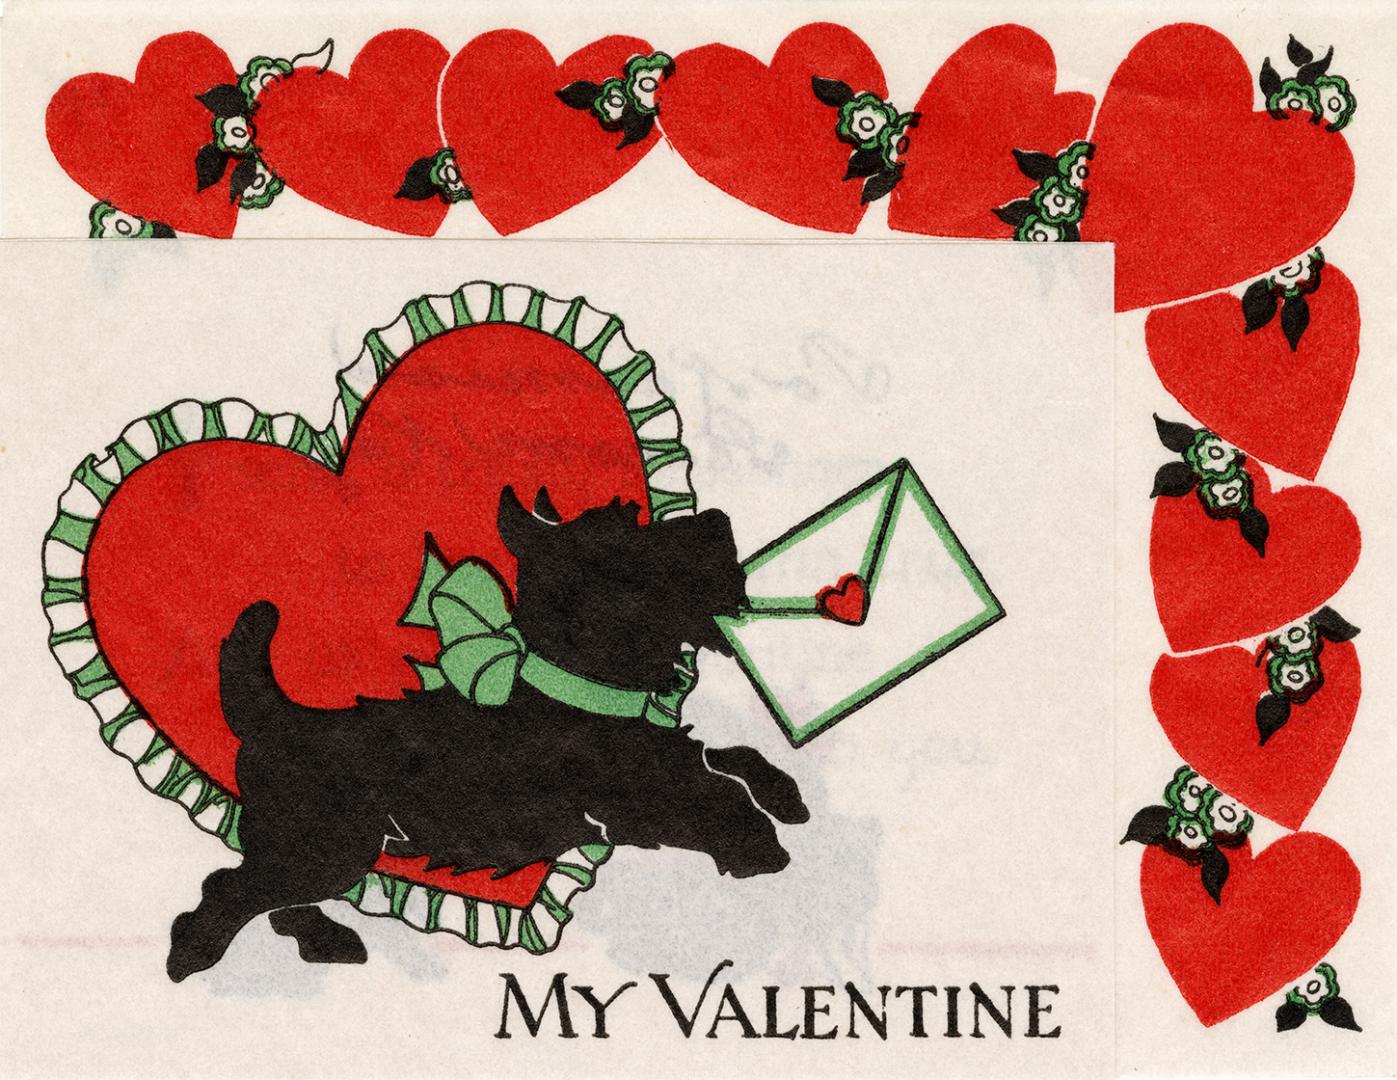 The front of the card depicts a black dog wearing a green bow and carrying a valentine envelope ...